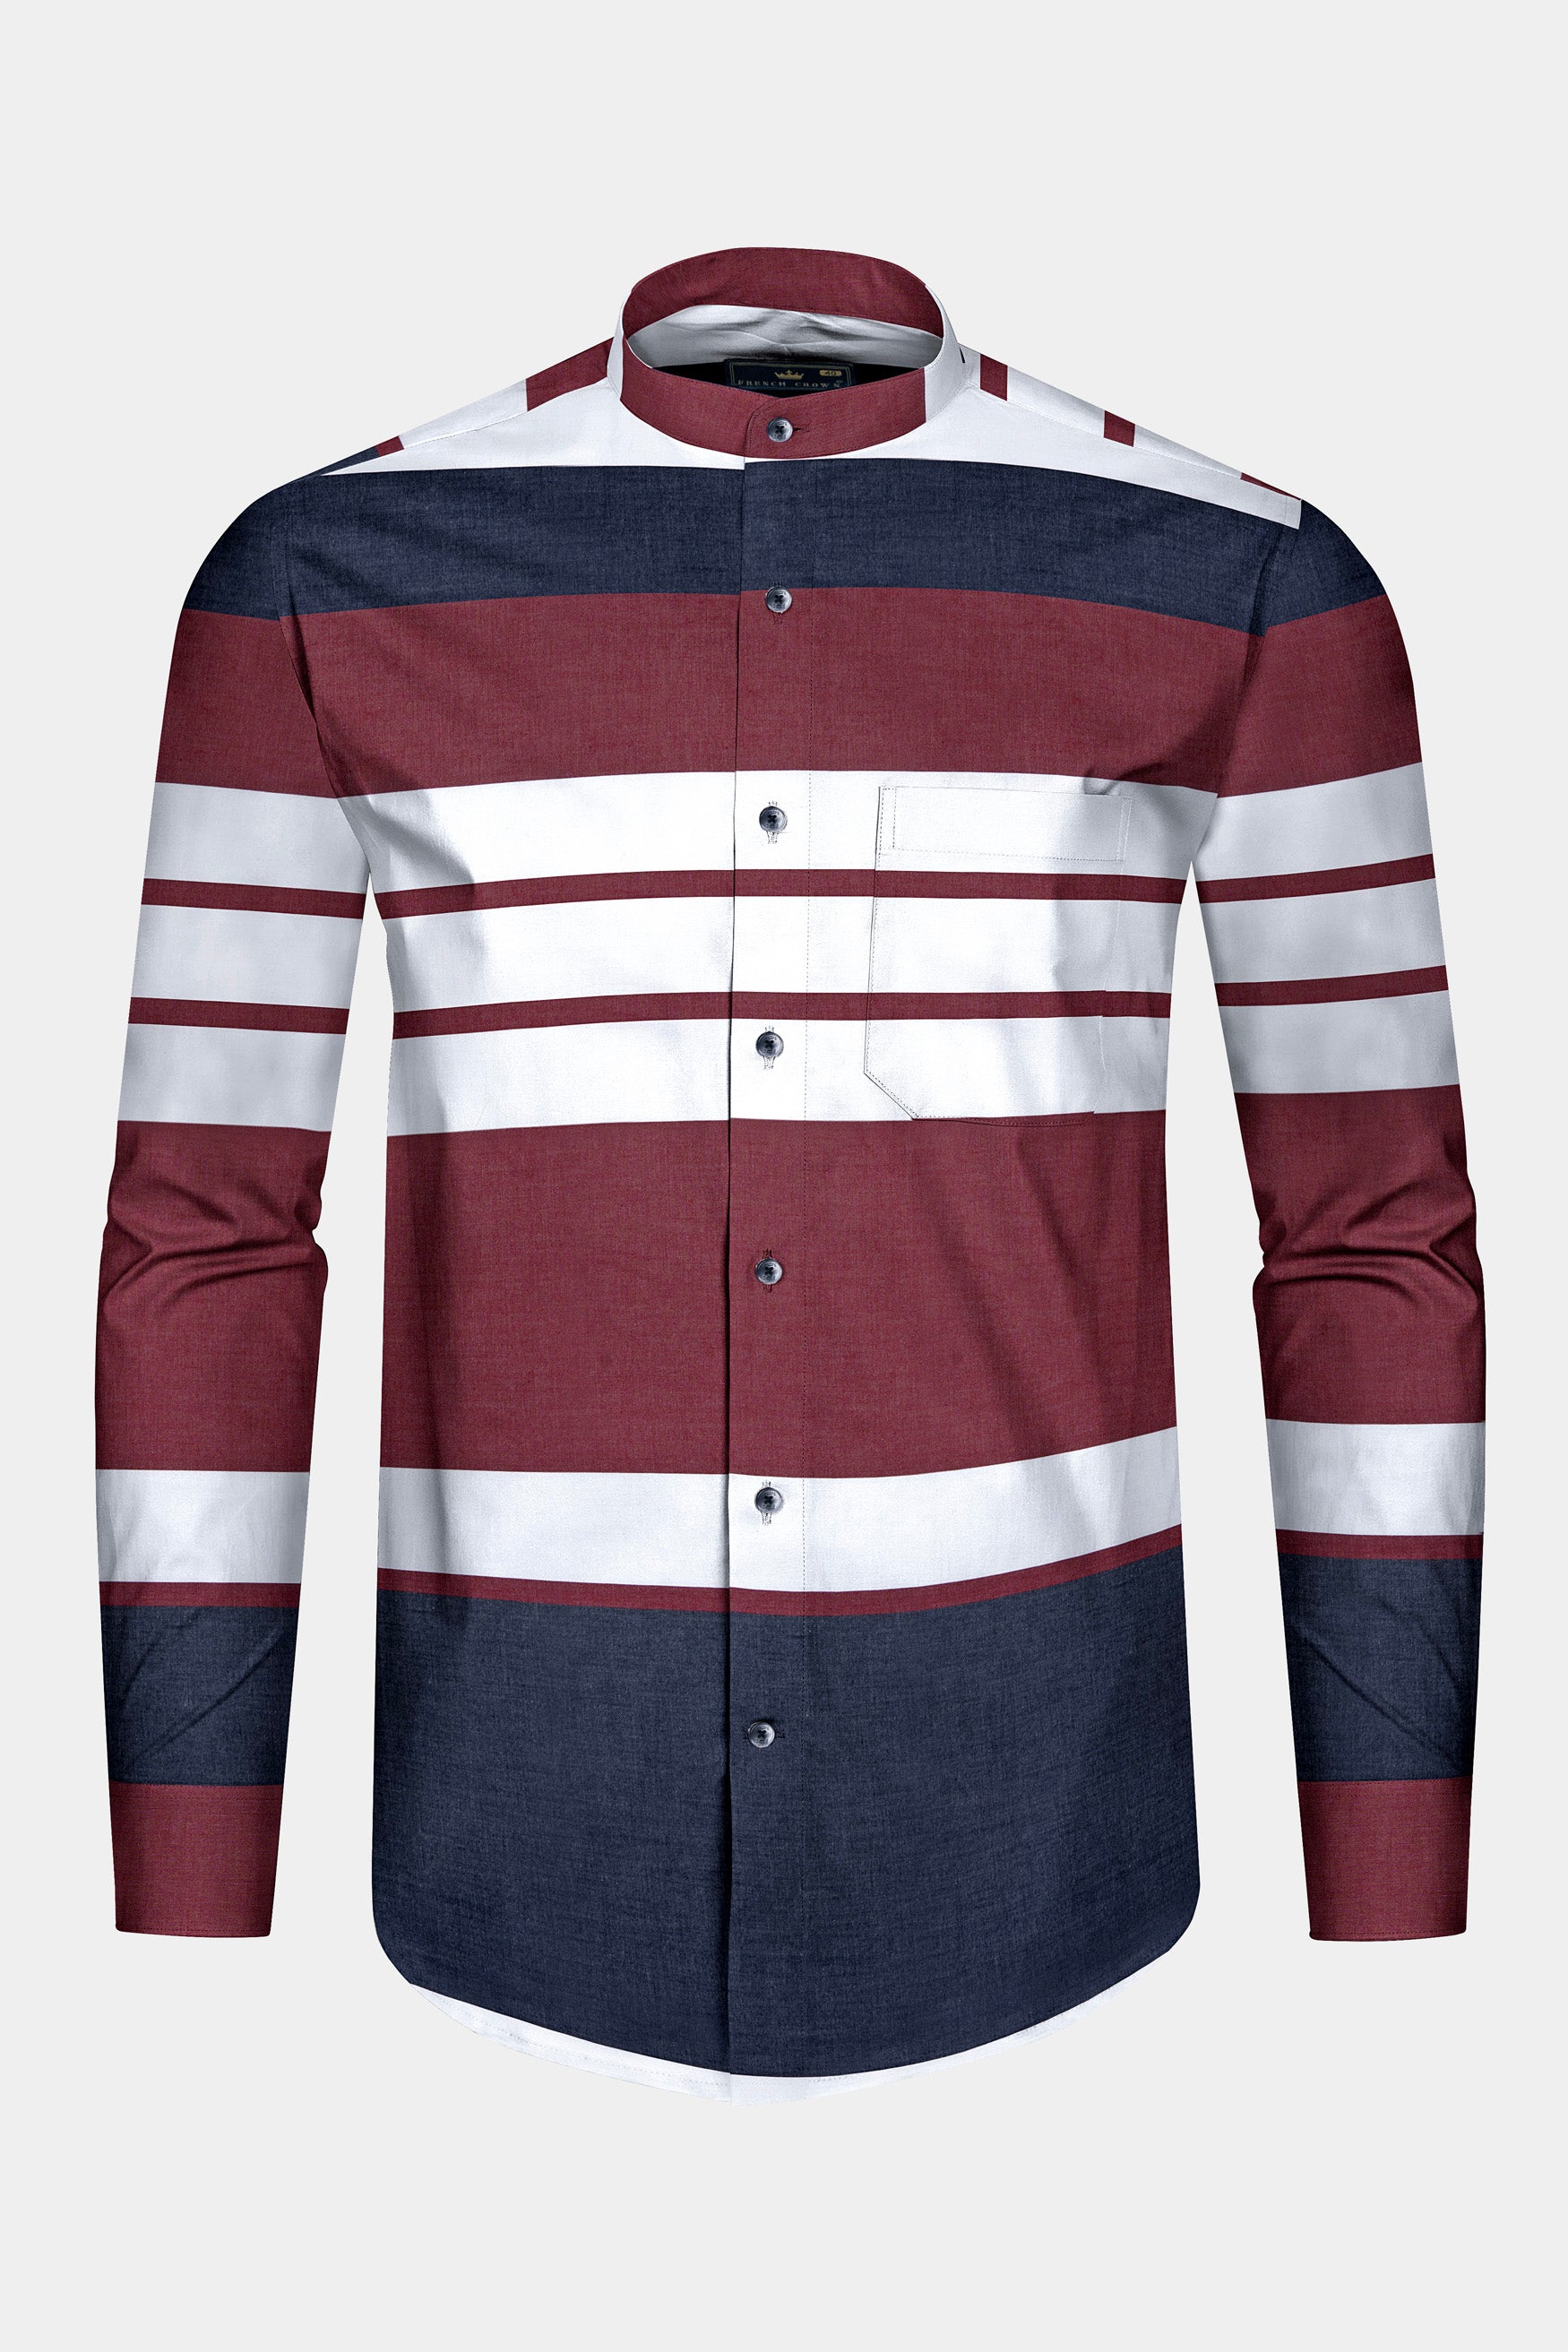 Mauve Red with White and Mirage Navy Blue Striped Super Soft Premium Cotton Shirt